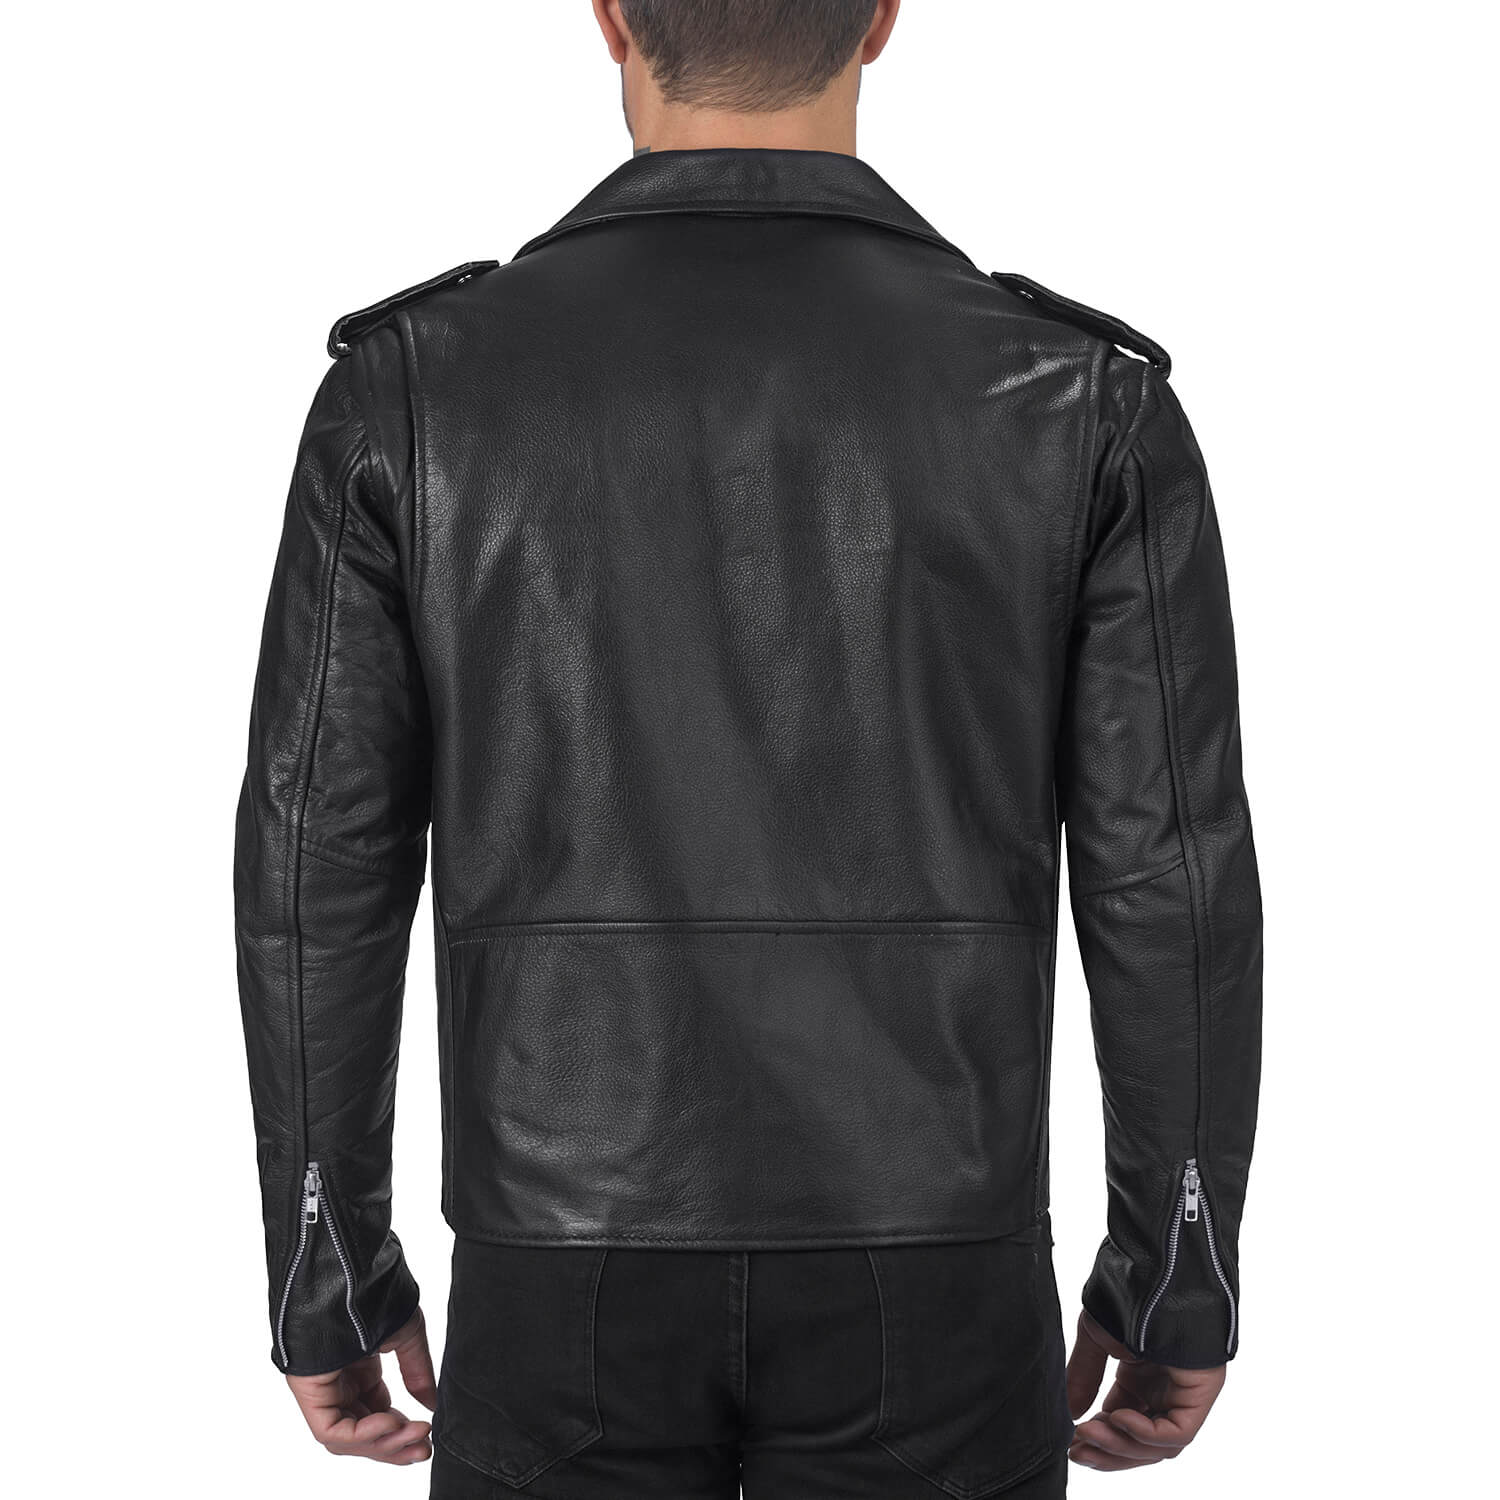 Buy Leather Biker Jacket For Men Best Stylish Solid Black Comfortable &  Casual Jacket (X-Large, Black-02) at Amazon.in